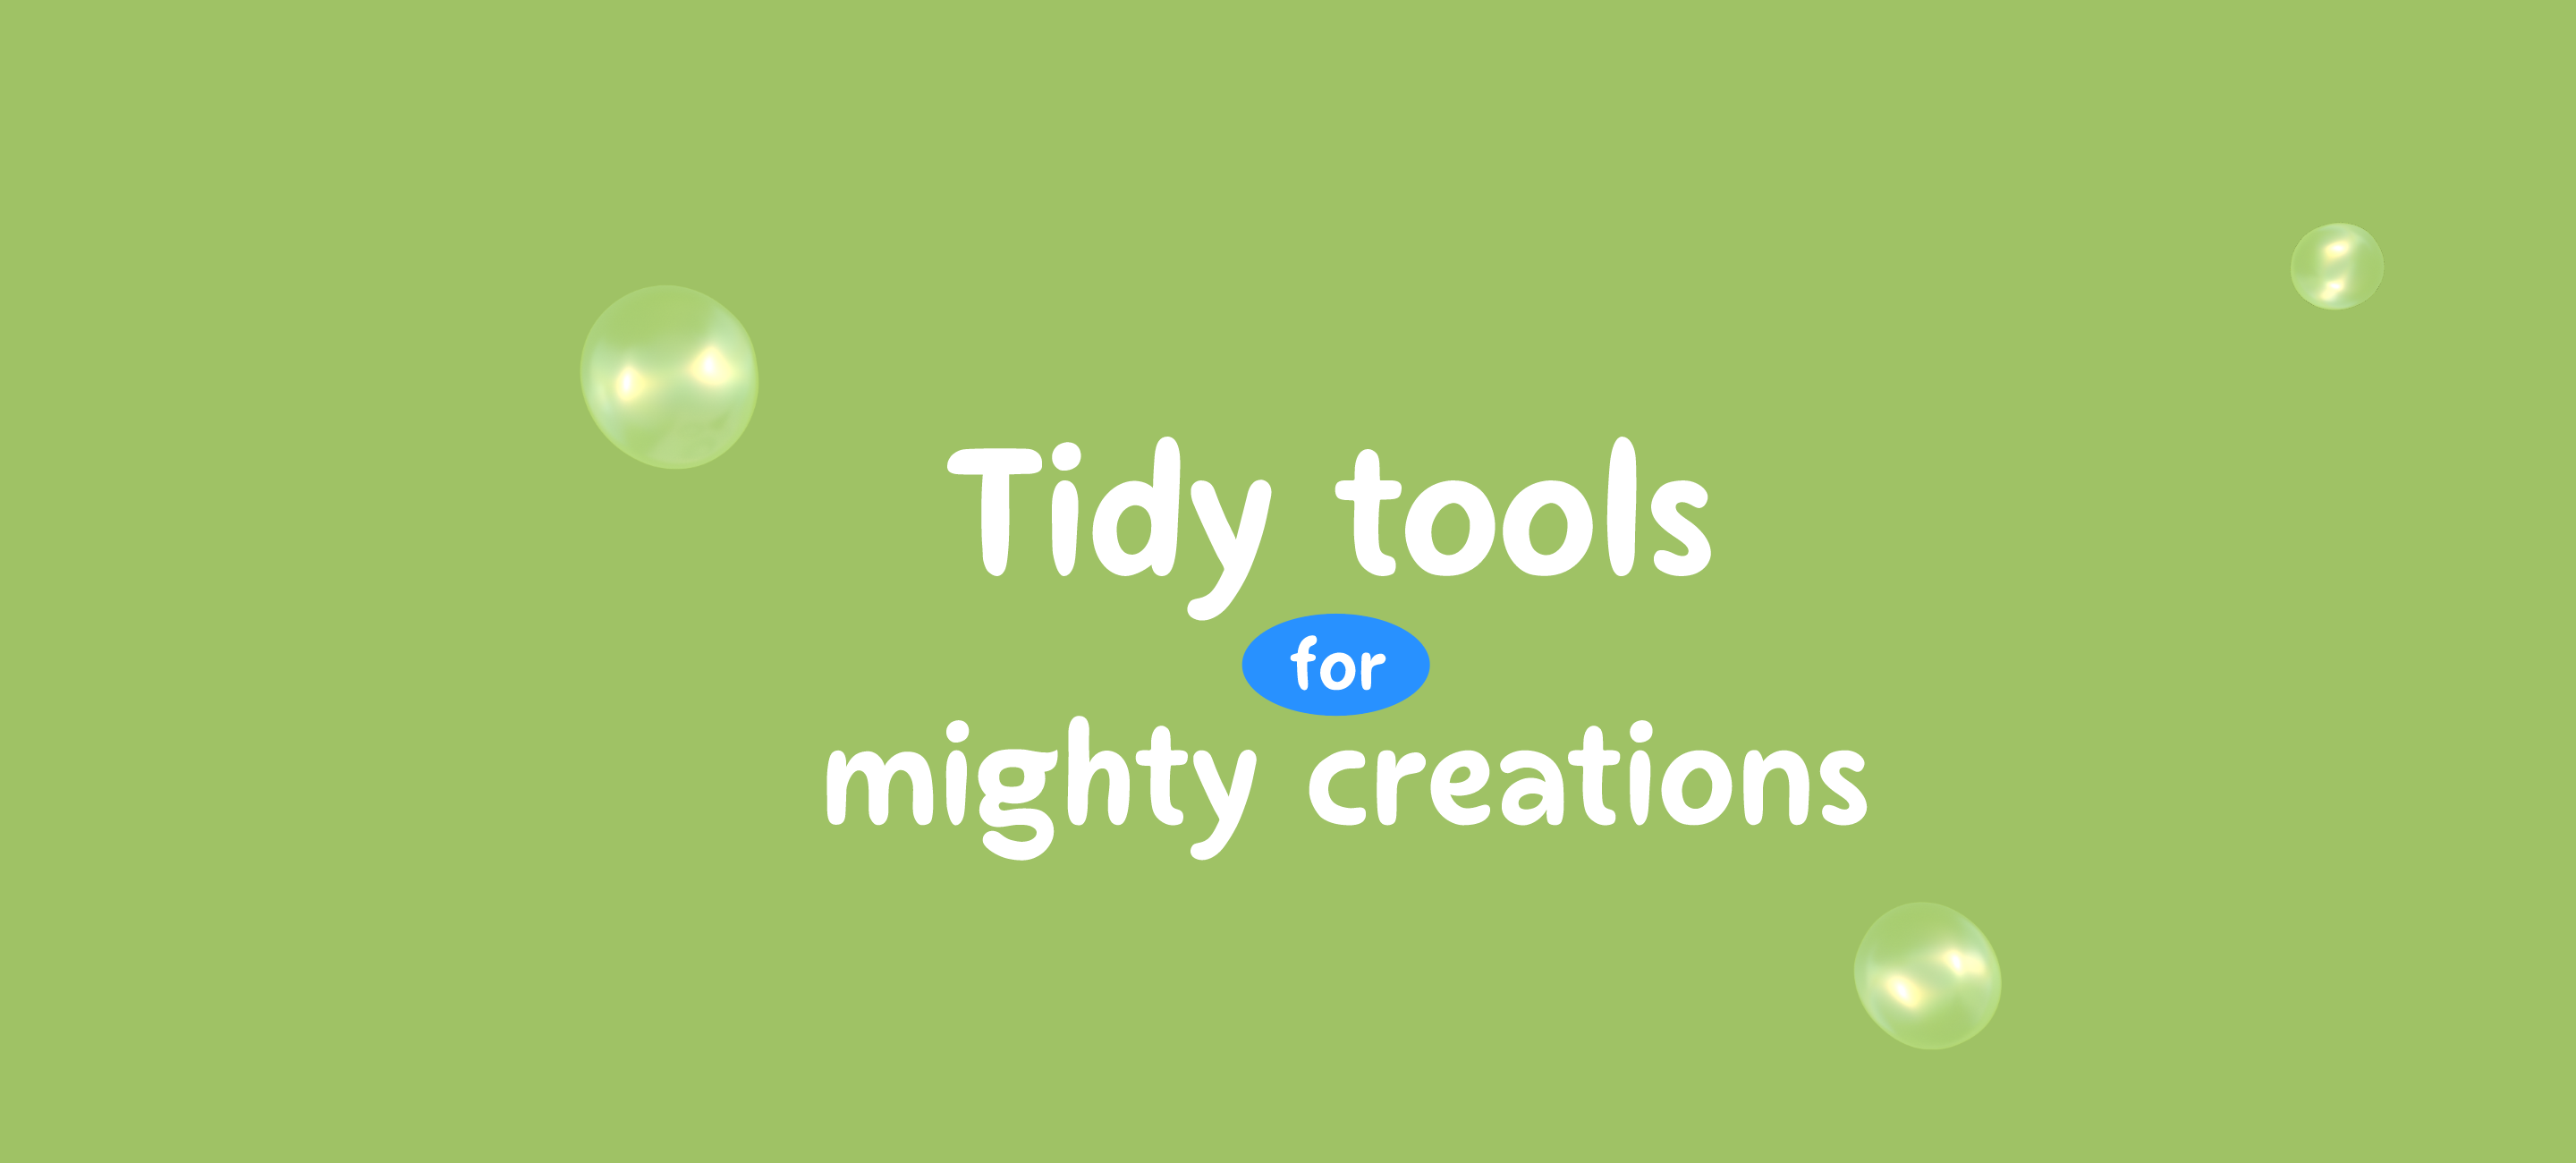 Tidy tools for mighty creations